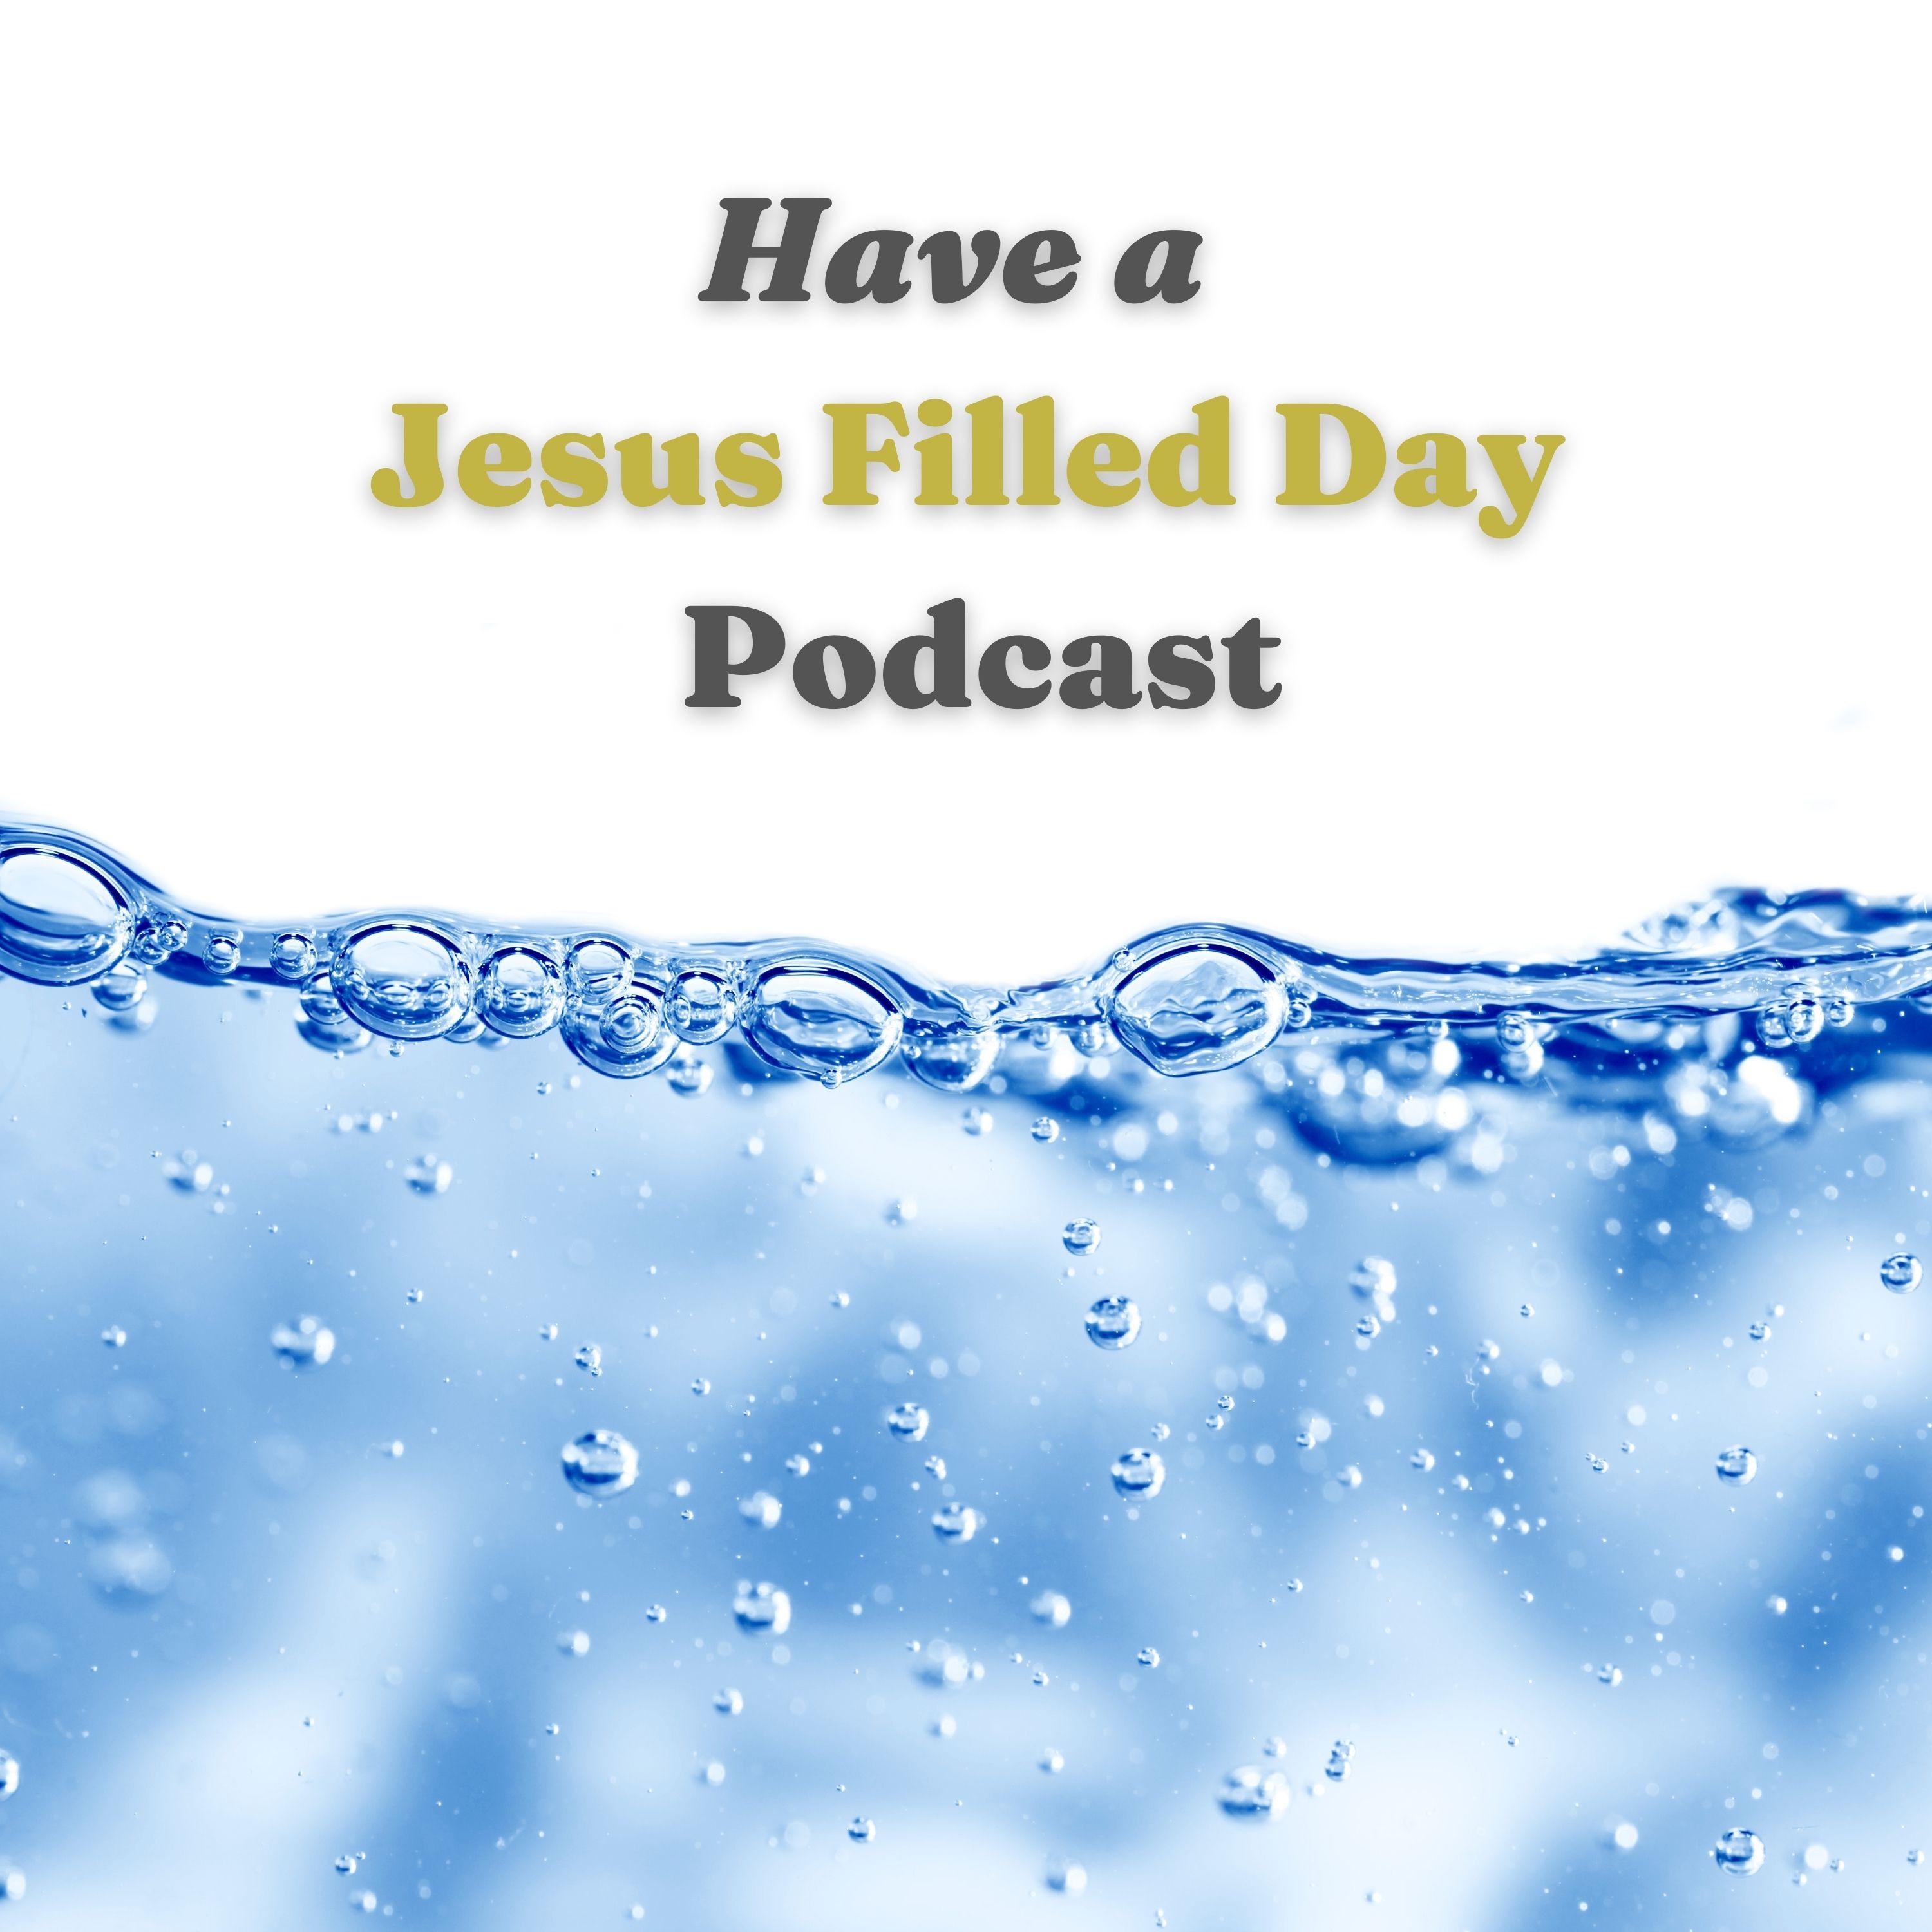 Have a Jesus Filled Day Podcast